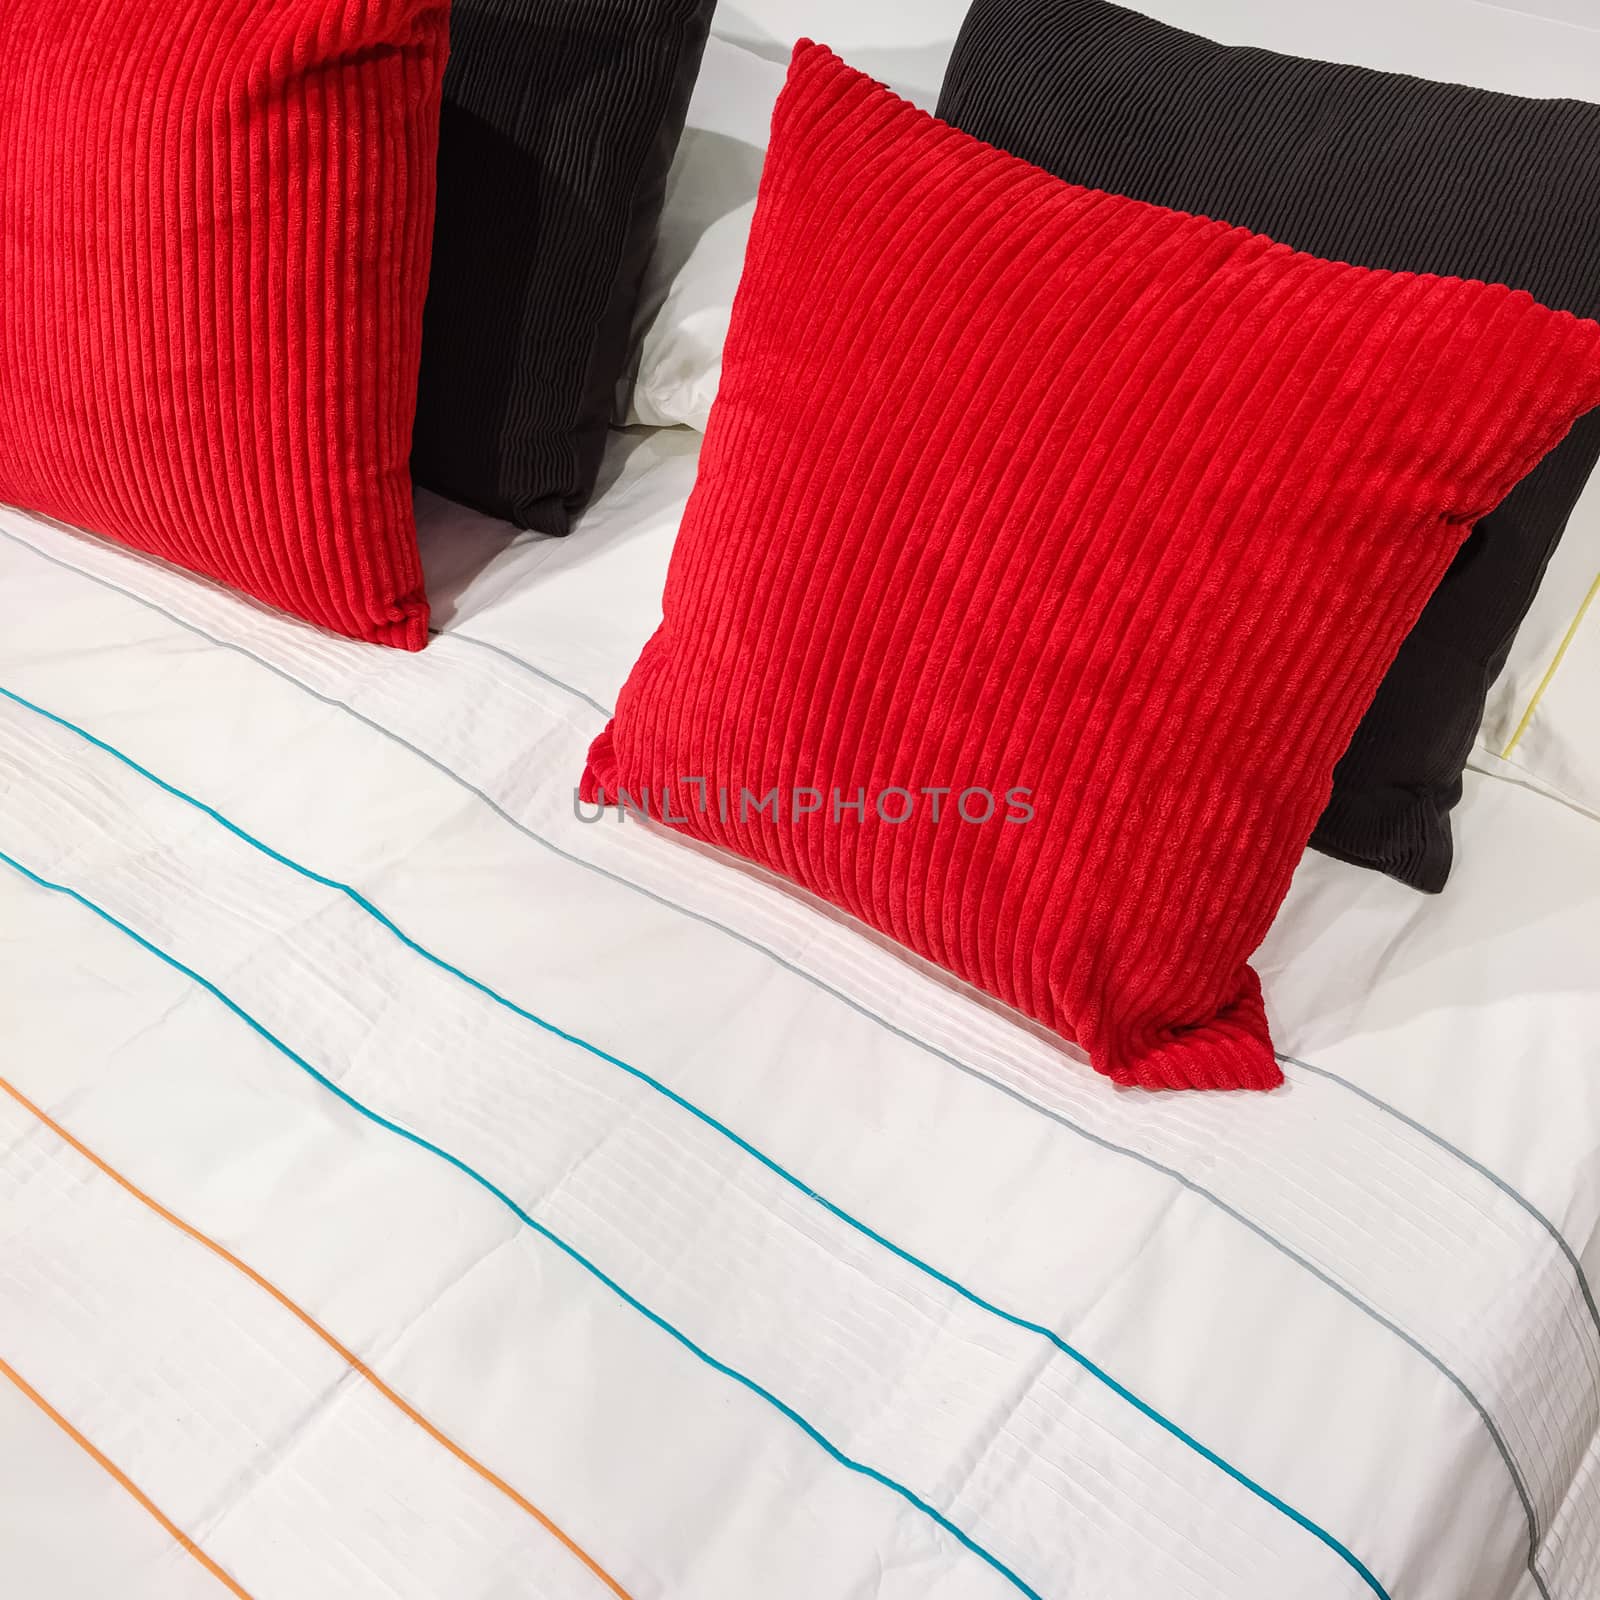 Red and black velveteen cushions on a bed with striped bed linen.